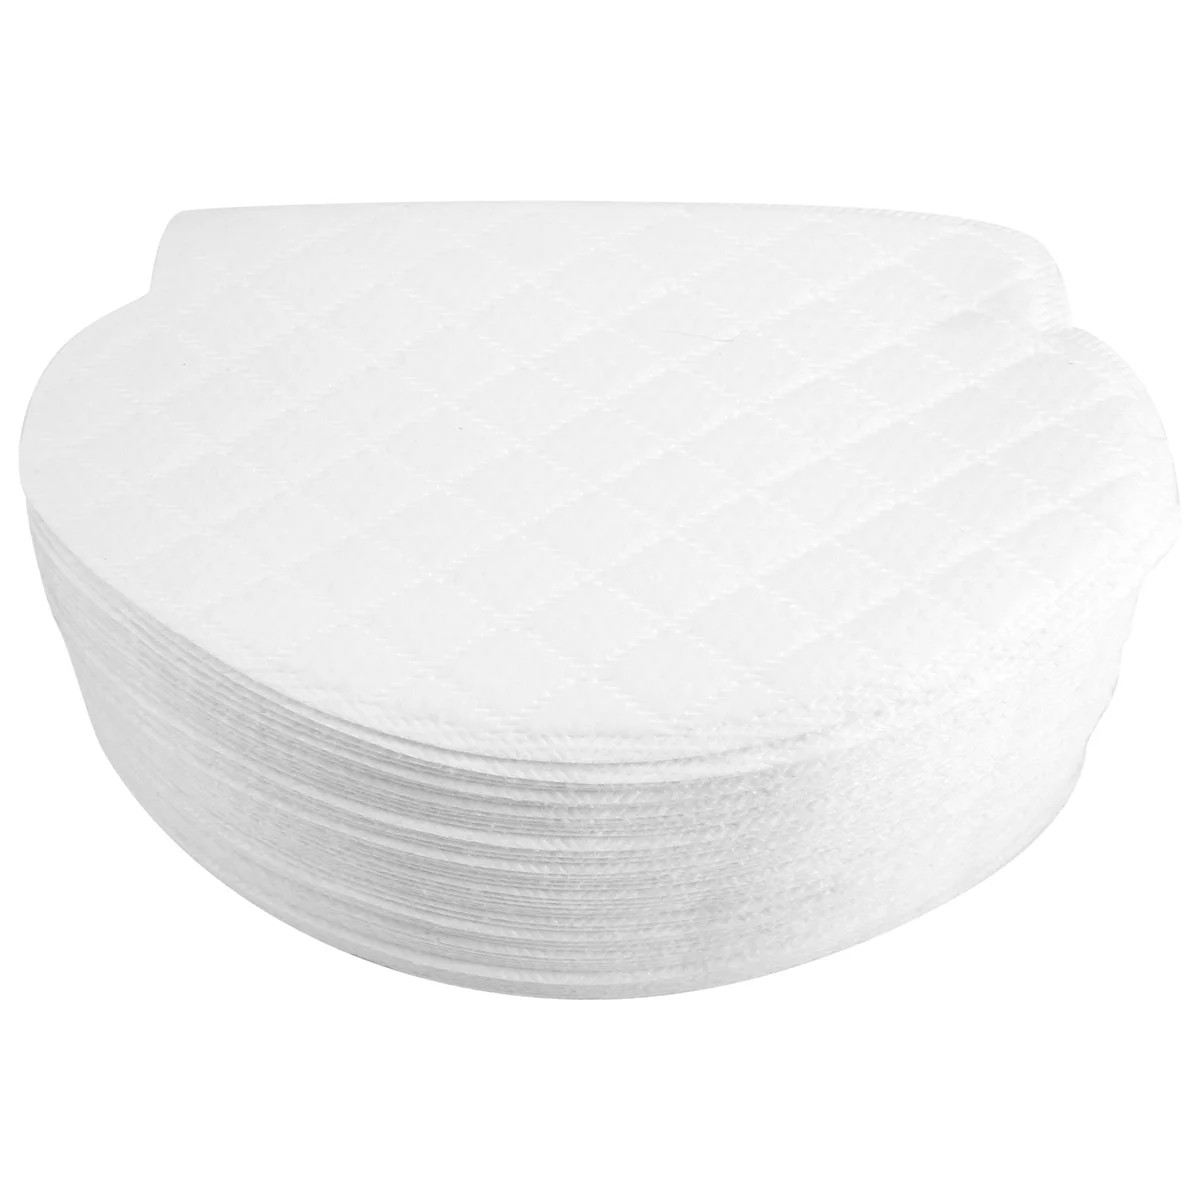 

50 Pack Disposable Mopping Pads Compatible for Ecovacs Deebot OZMO N7 / T5 / OZMO 920 / OZMO 950 Robot Vacuum Cleaner